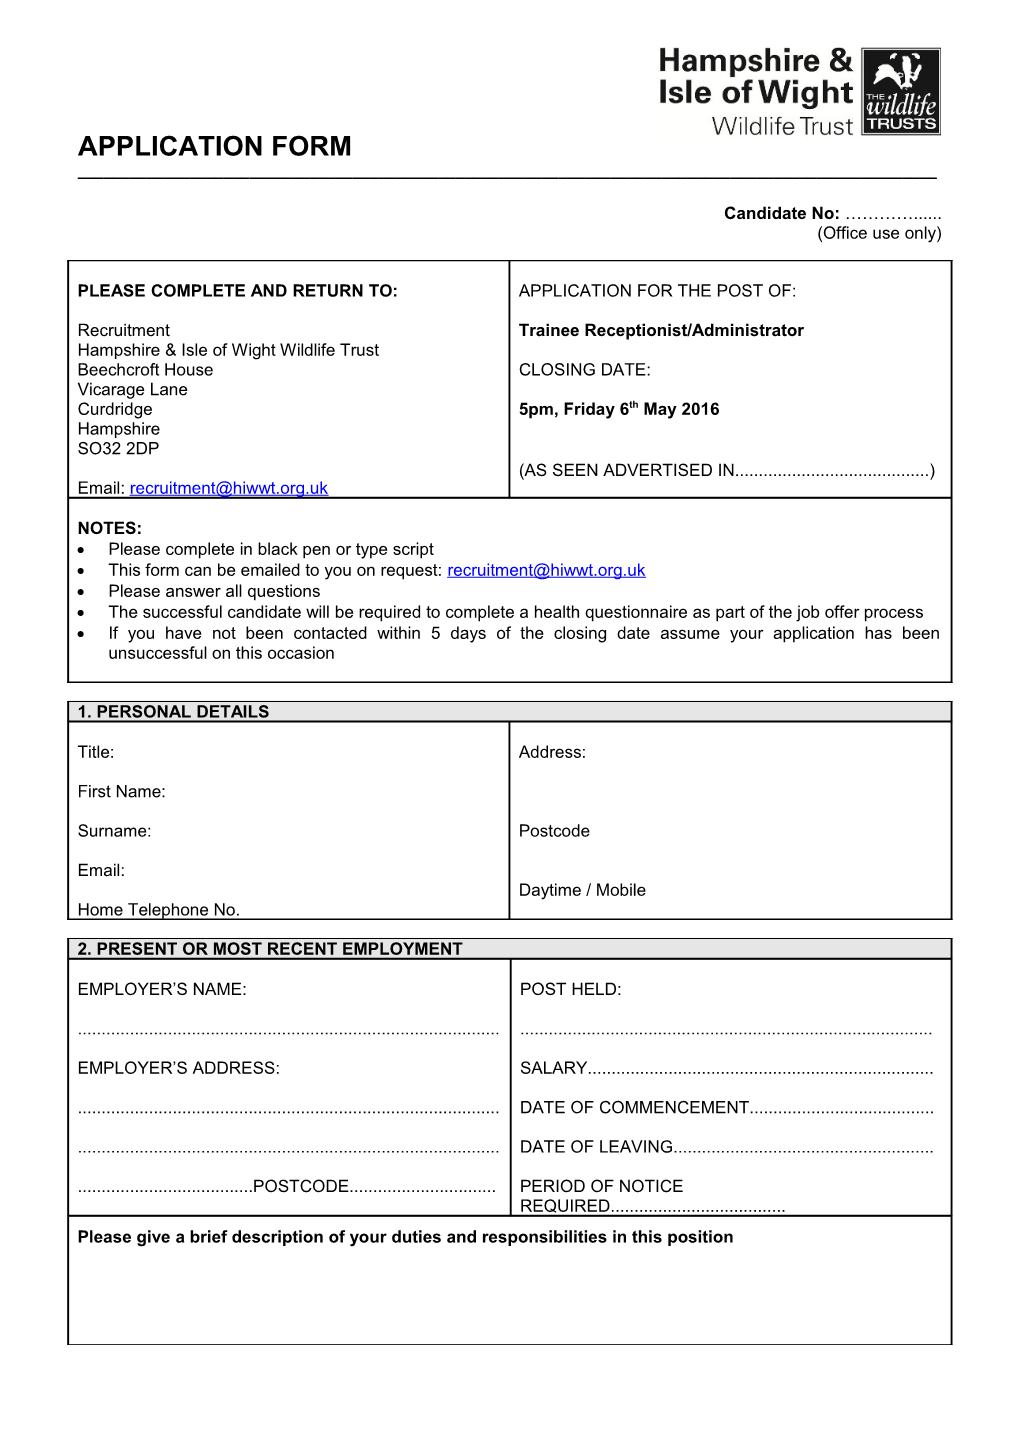 Application Form s68